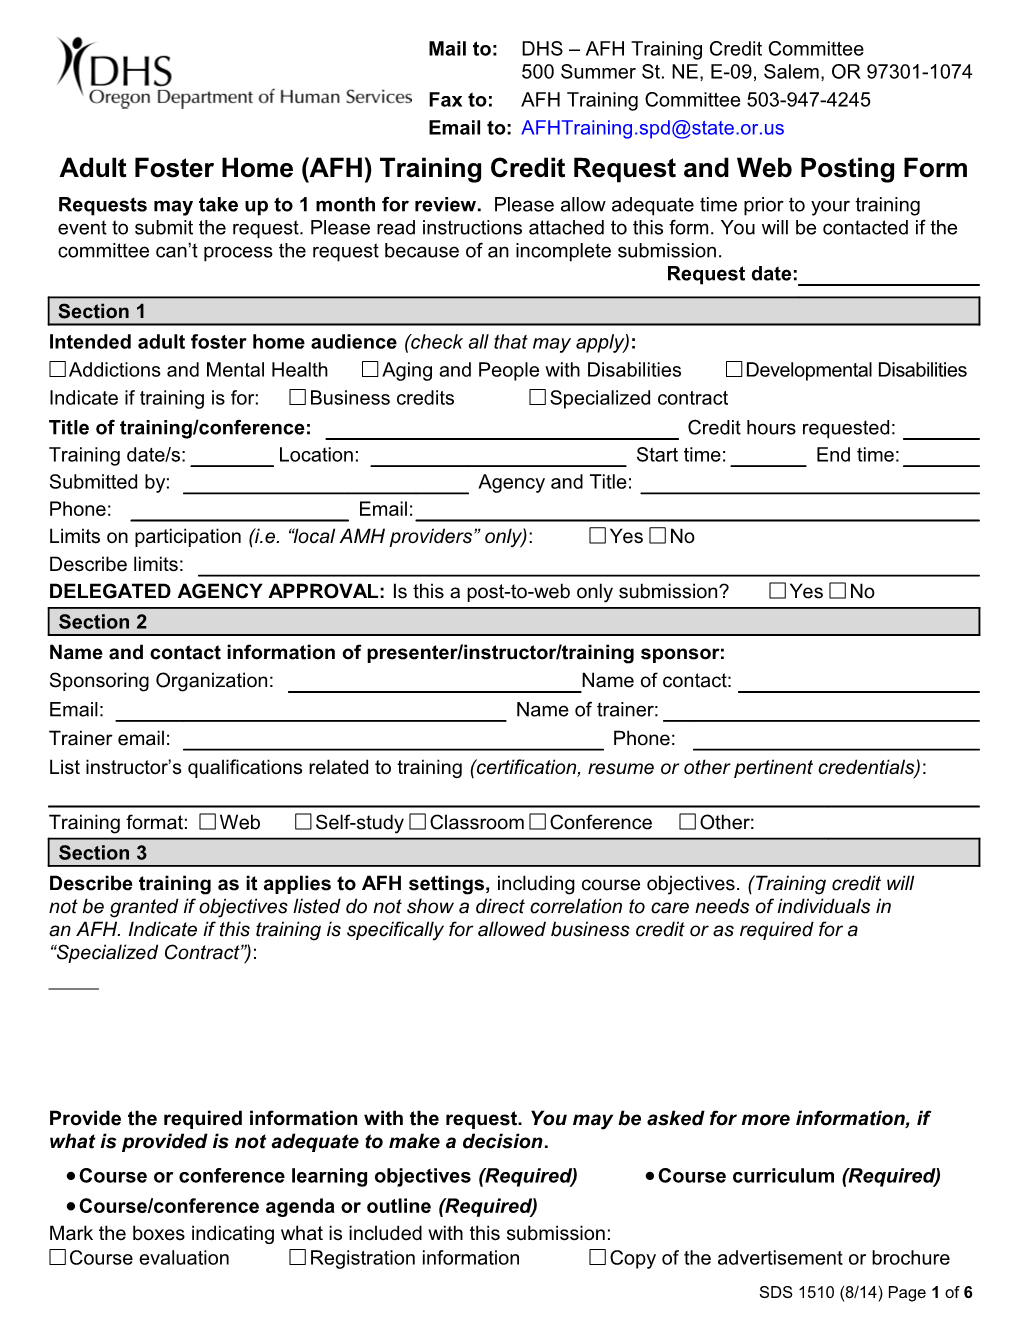 Adult Foster Home (AFH) Training Credit Request and Web Posting Form